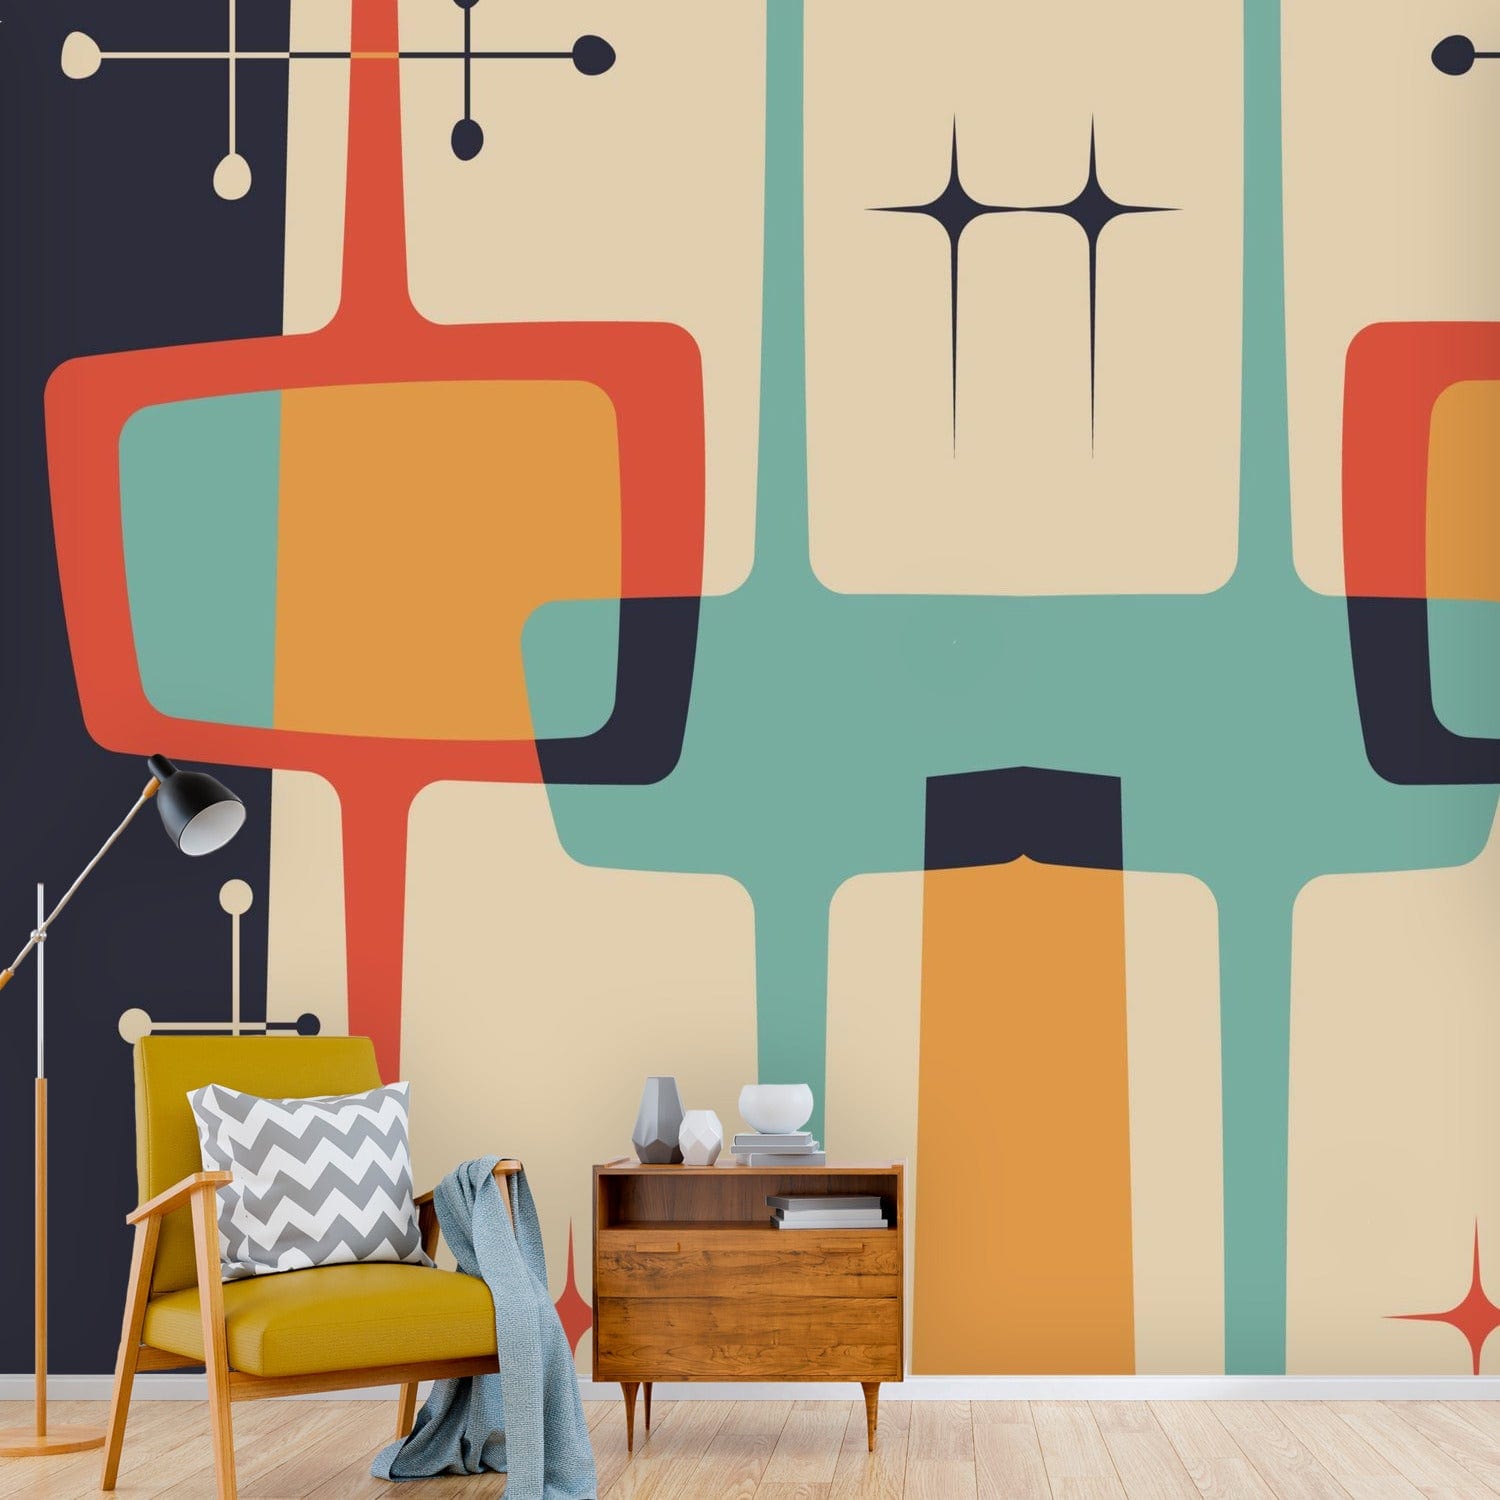 Mid Century Modern Abstract, Geometric Atomic Living, Beige, Yellow, Teal, Charcoal Gray Peel And Stick Wall Murals Wallpaper H110 x W120